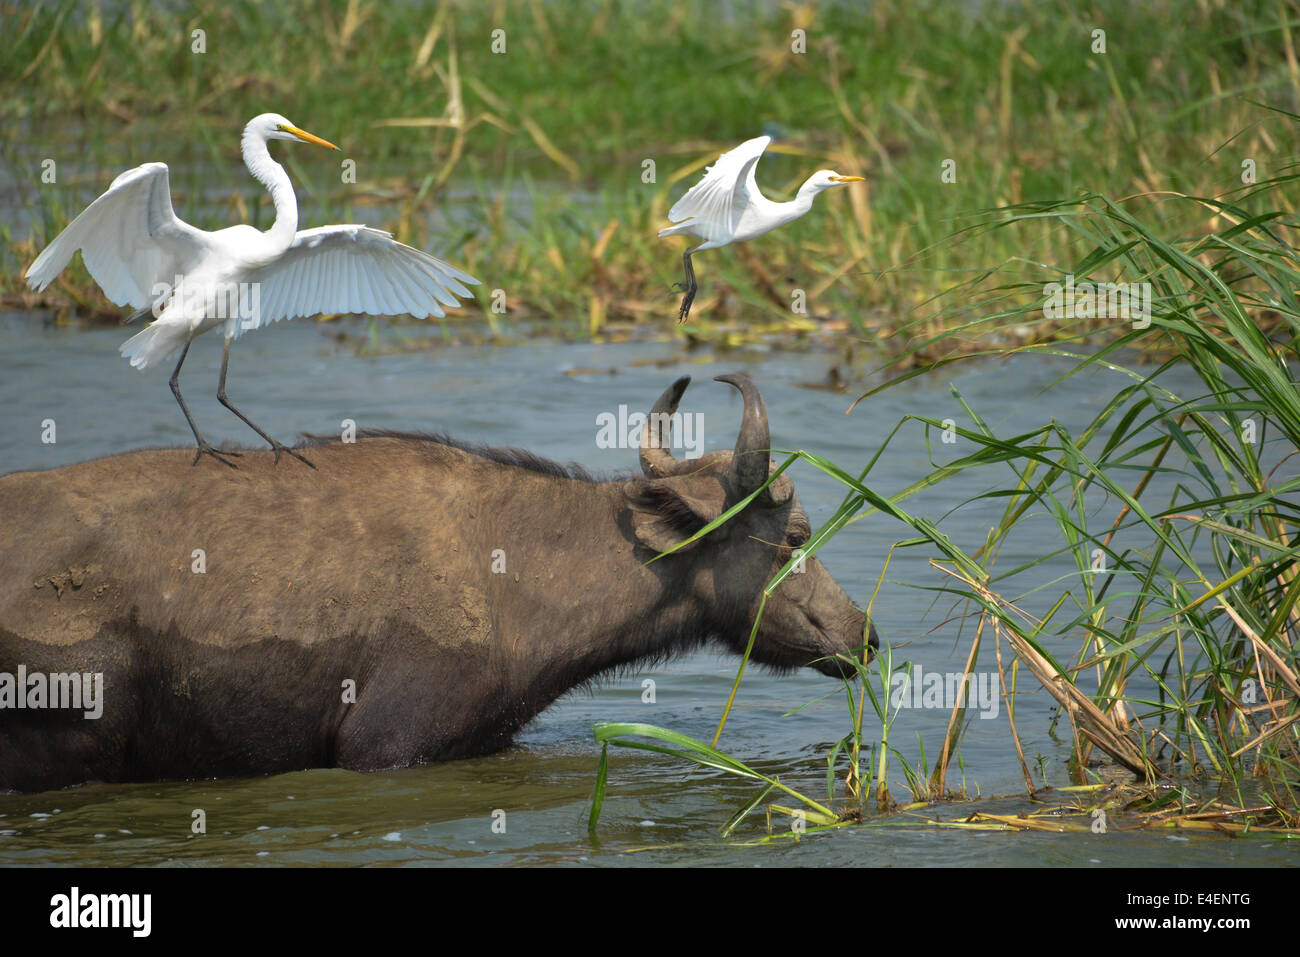 a buffalo with an egret on his back in the river at queen elizabeth national park in Uganda, Africa Stock Photo